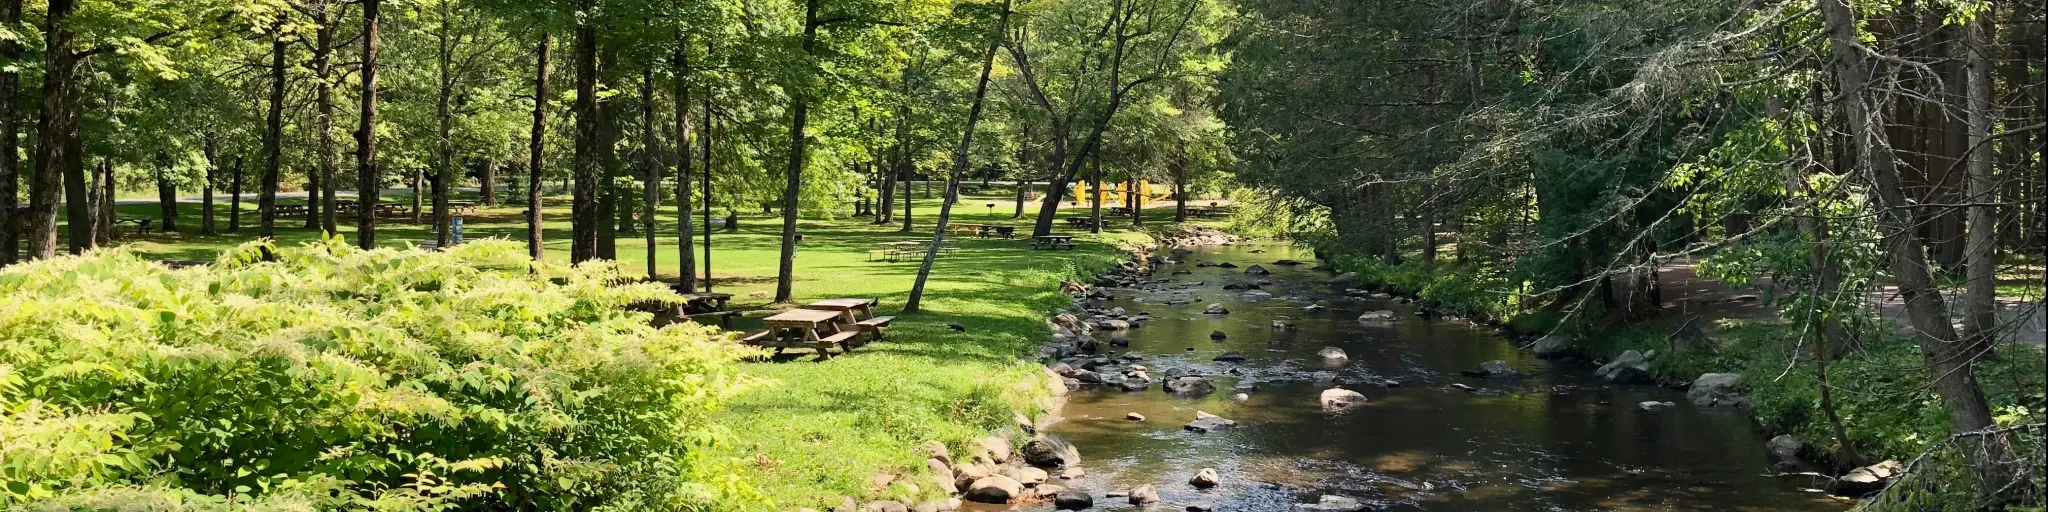 Saratoga Springs, NY, USA with a view of a picnic area by a brook at the Saratoga Spa State Park.